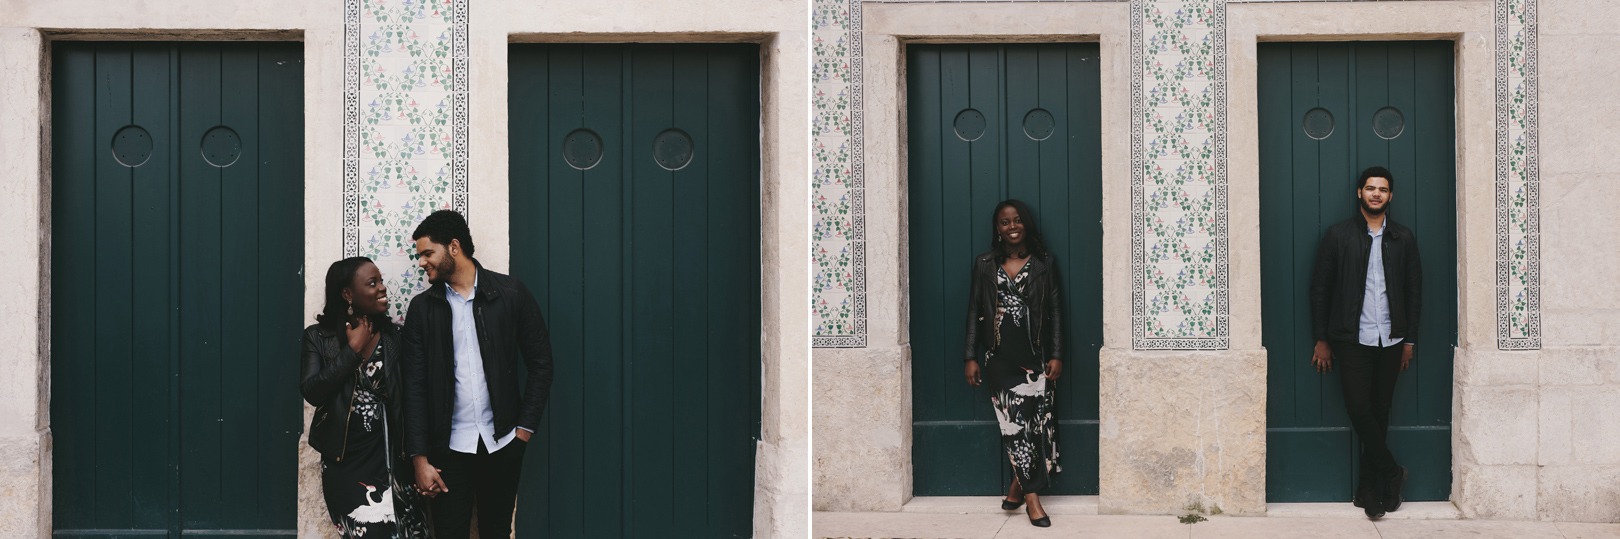 candid engagement photo shoot in front of famous Lisbon tiled walls